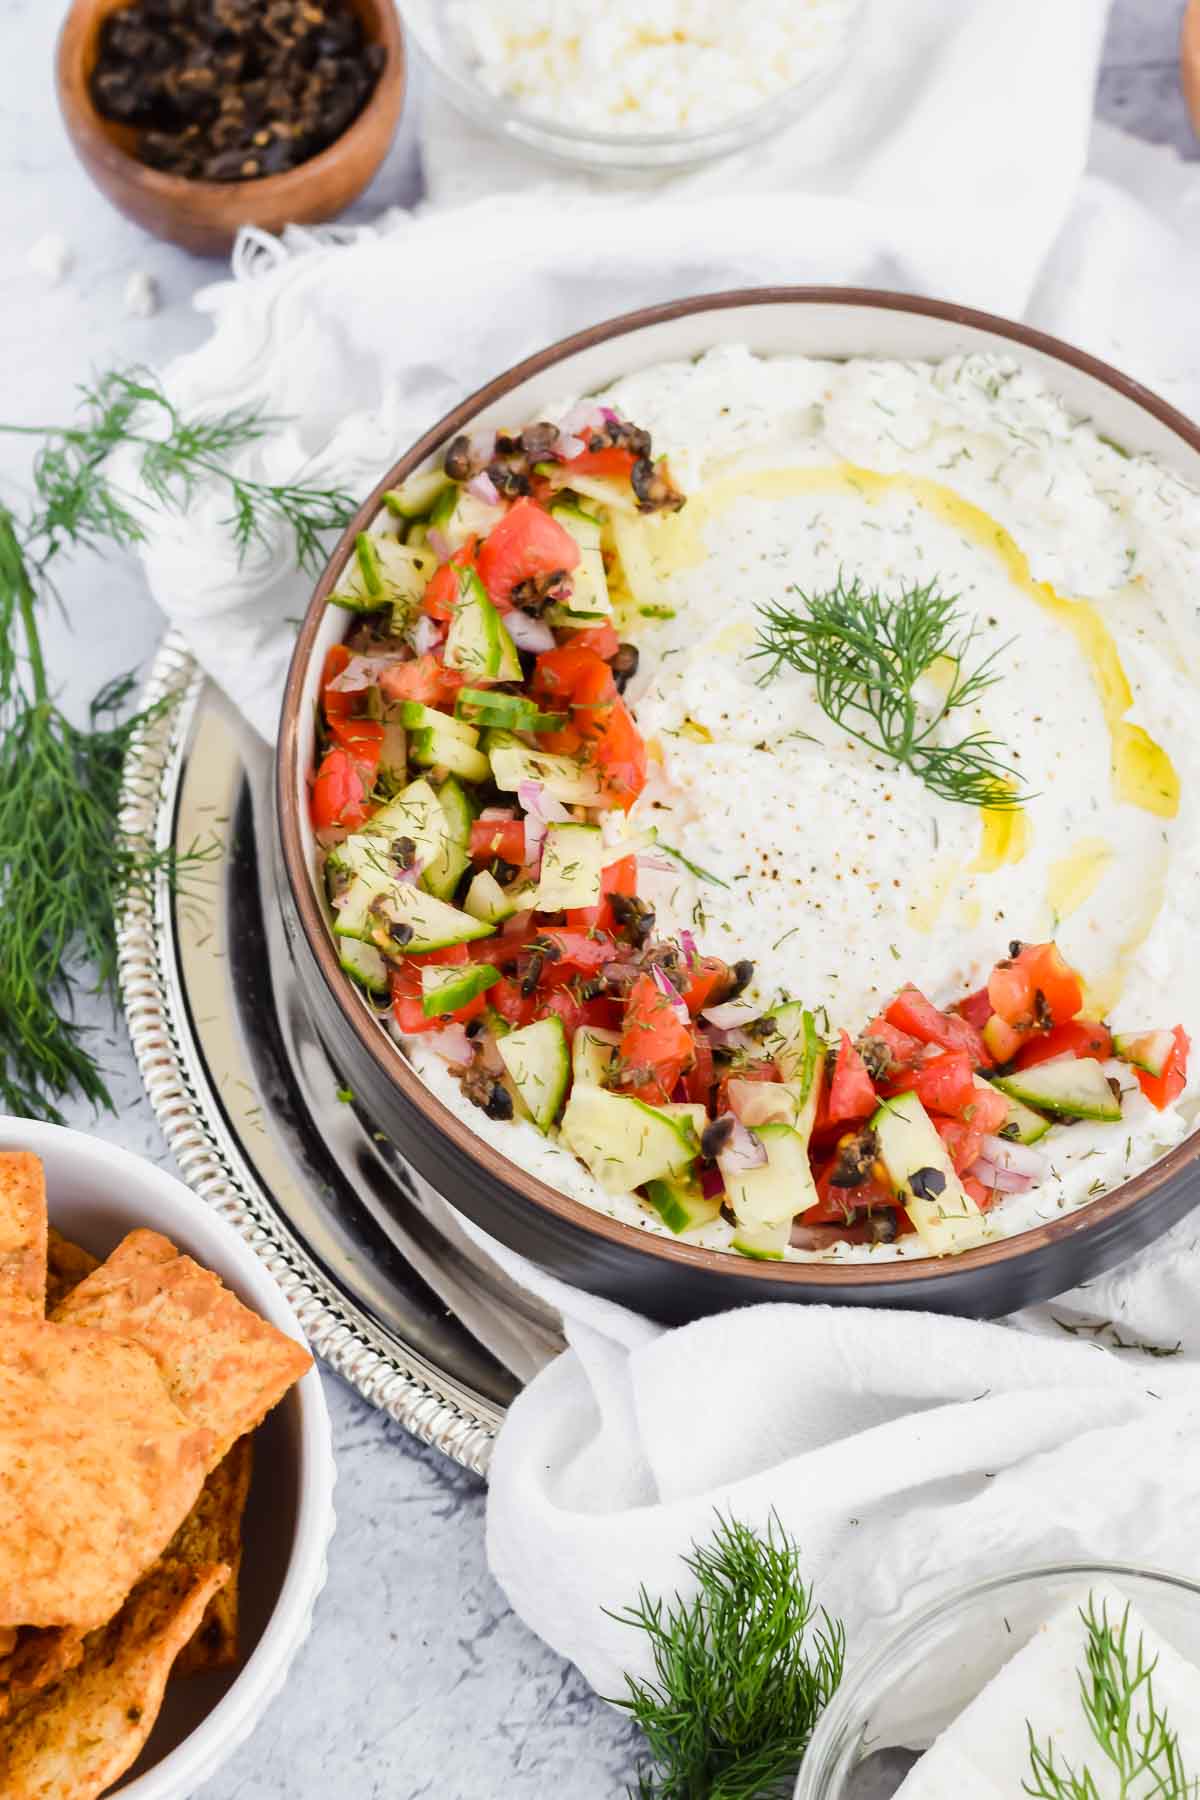 dill feta dip garnished with dill, cucumbers, tomatoes, and olives.